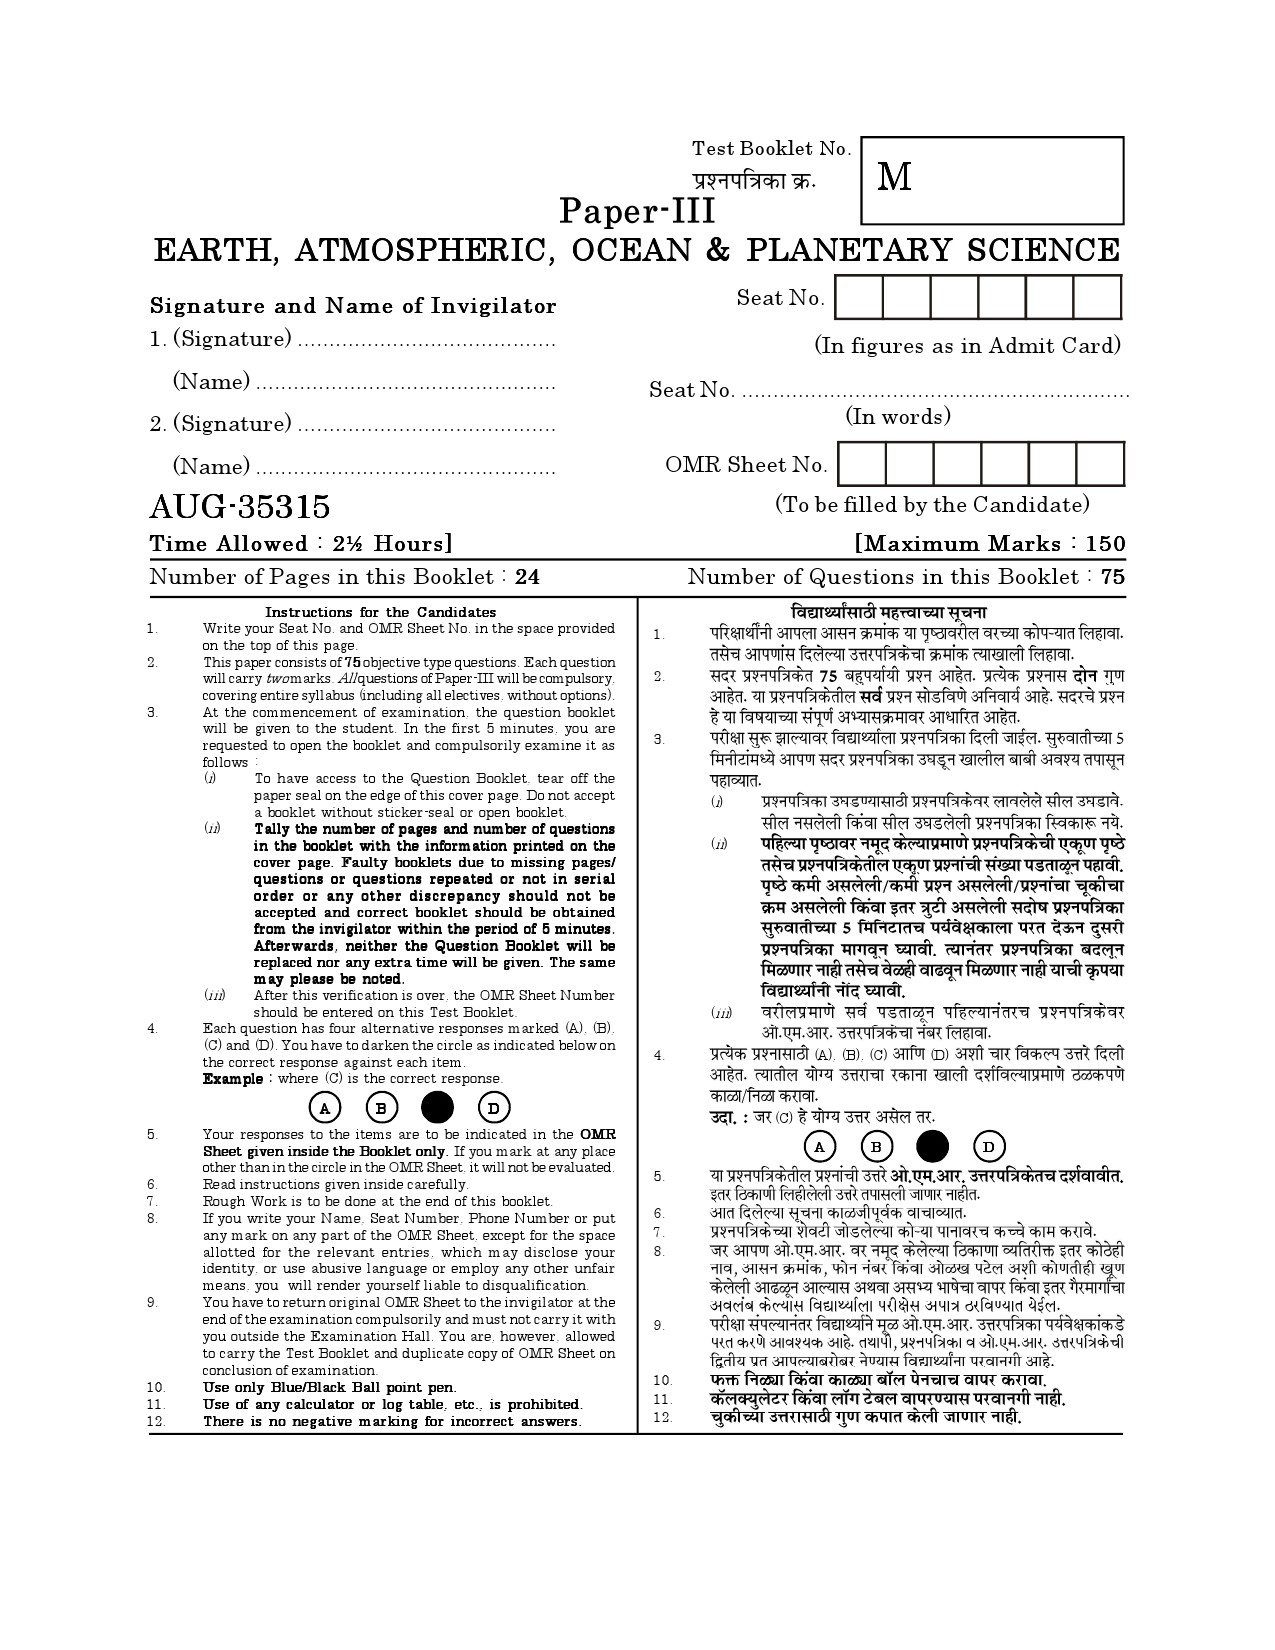 Maharashtra SET Earth Atmospheric Ocean Planetary Science Question Paper III August 2015 1